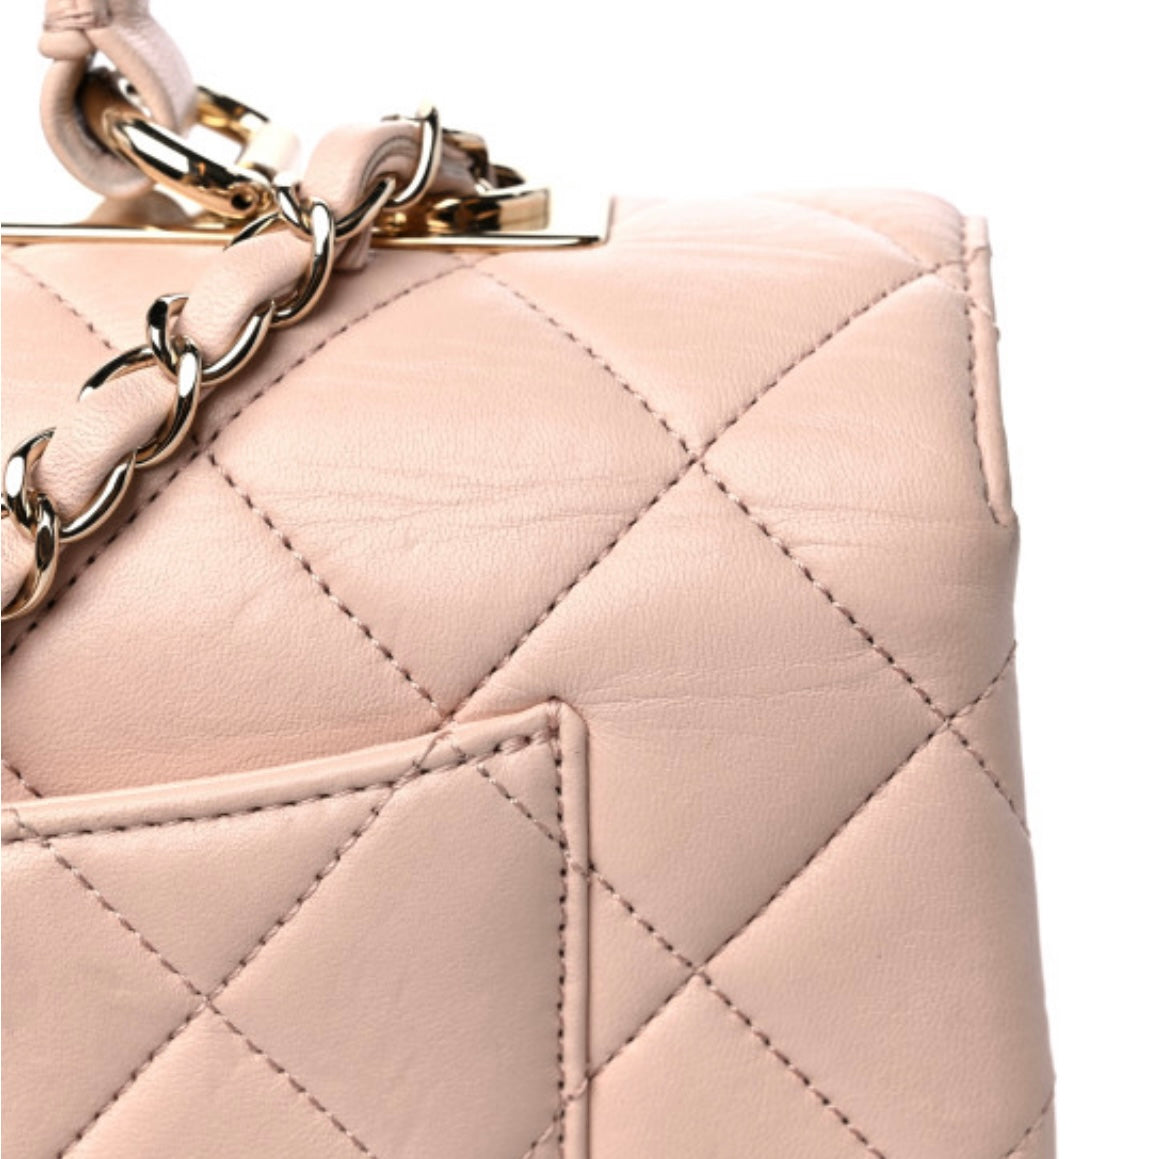 Chanel Pink Quilted Lambskin Small Trendy CC Top Handle Flap Bag